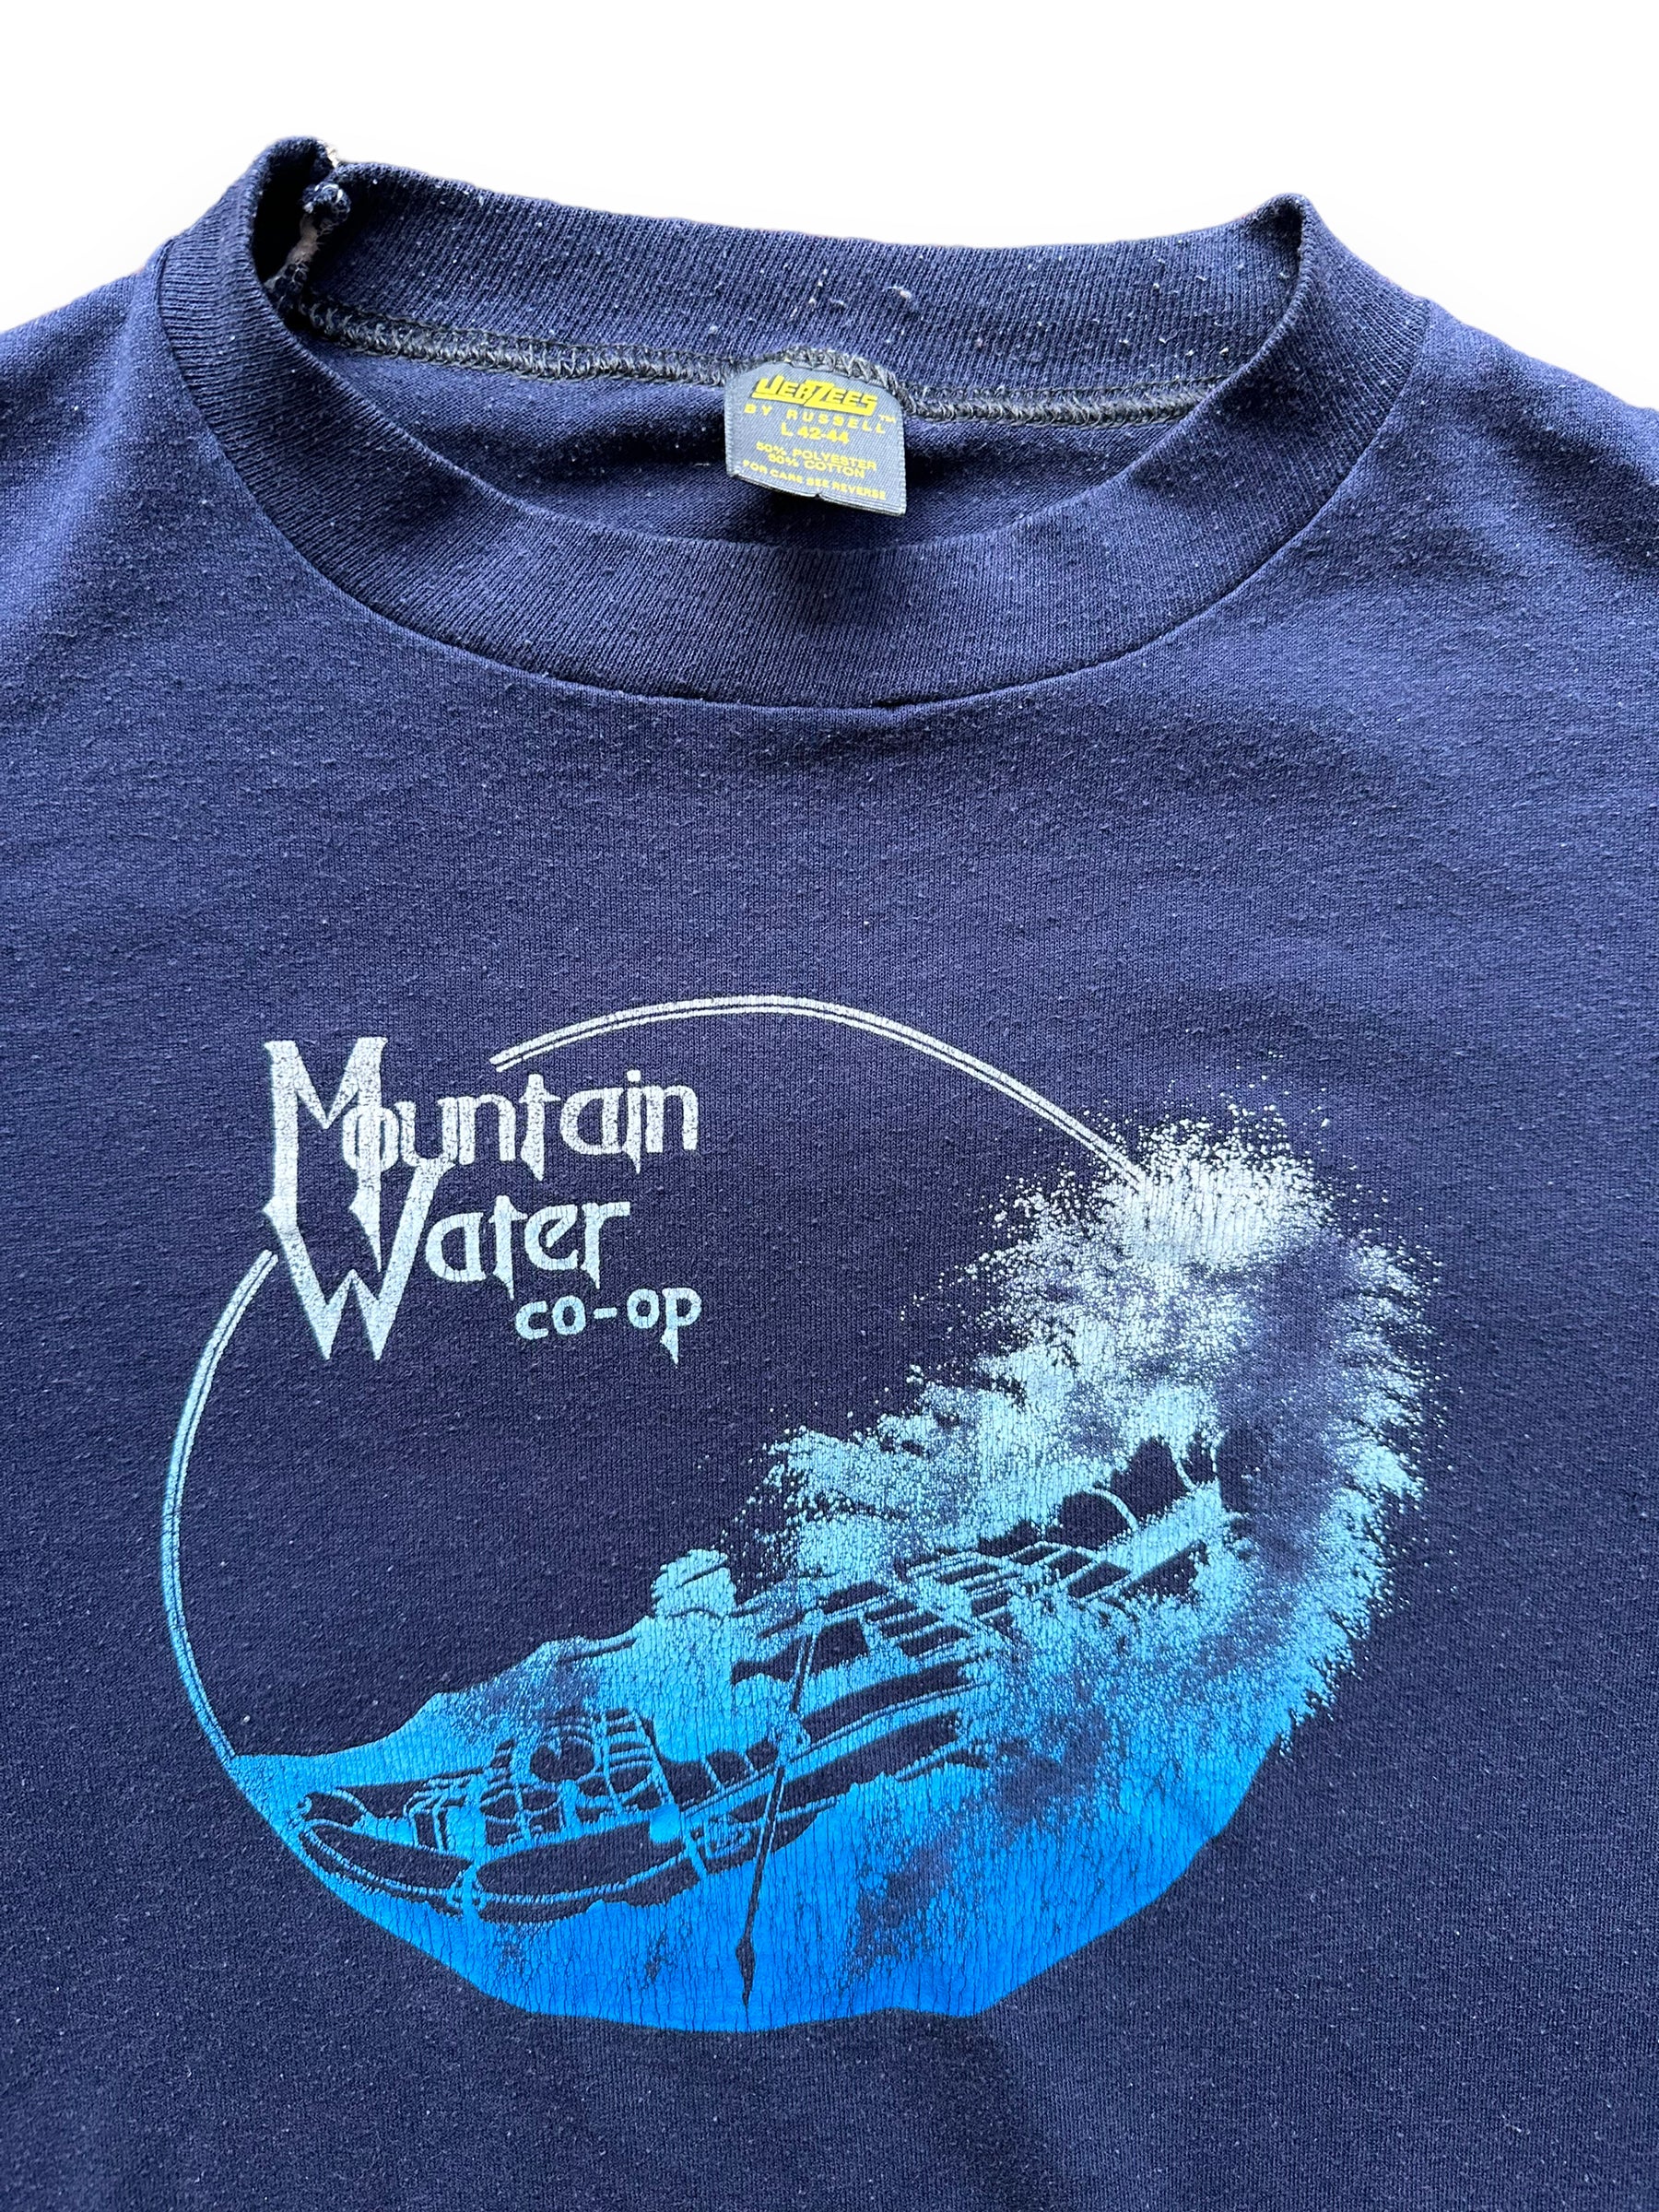 The – Barn T-Shirts Co-op | Graphic L Vintage Water SZ Tee Owl Vintage Seatt Mountain